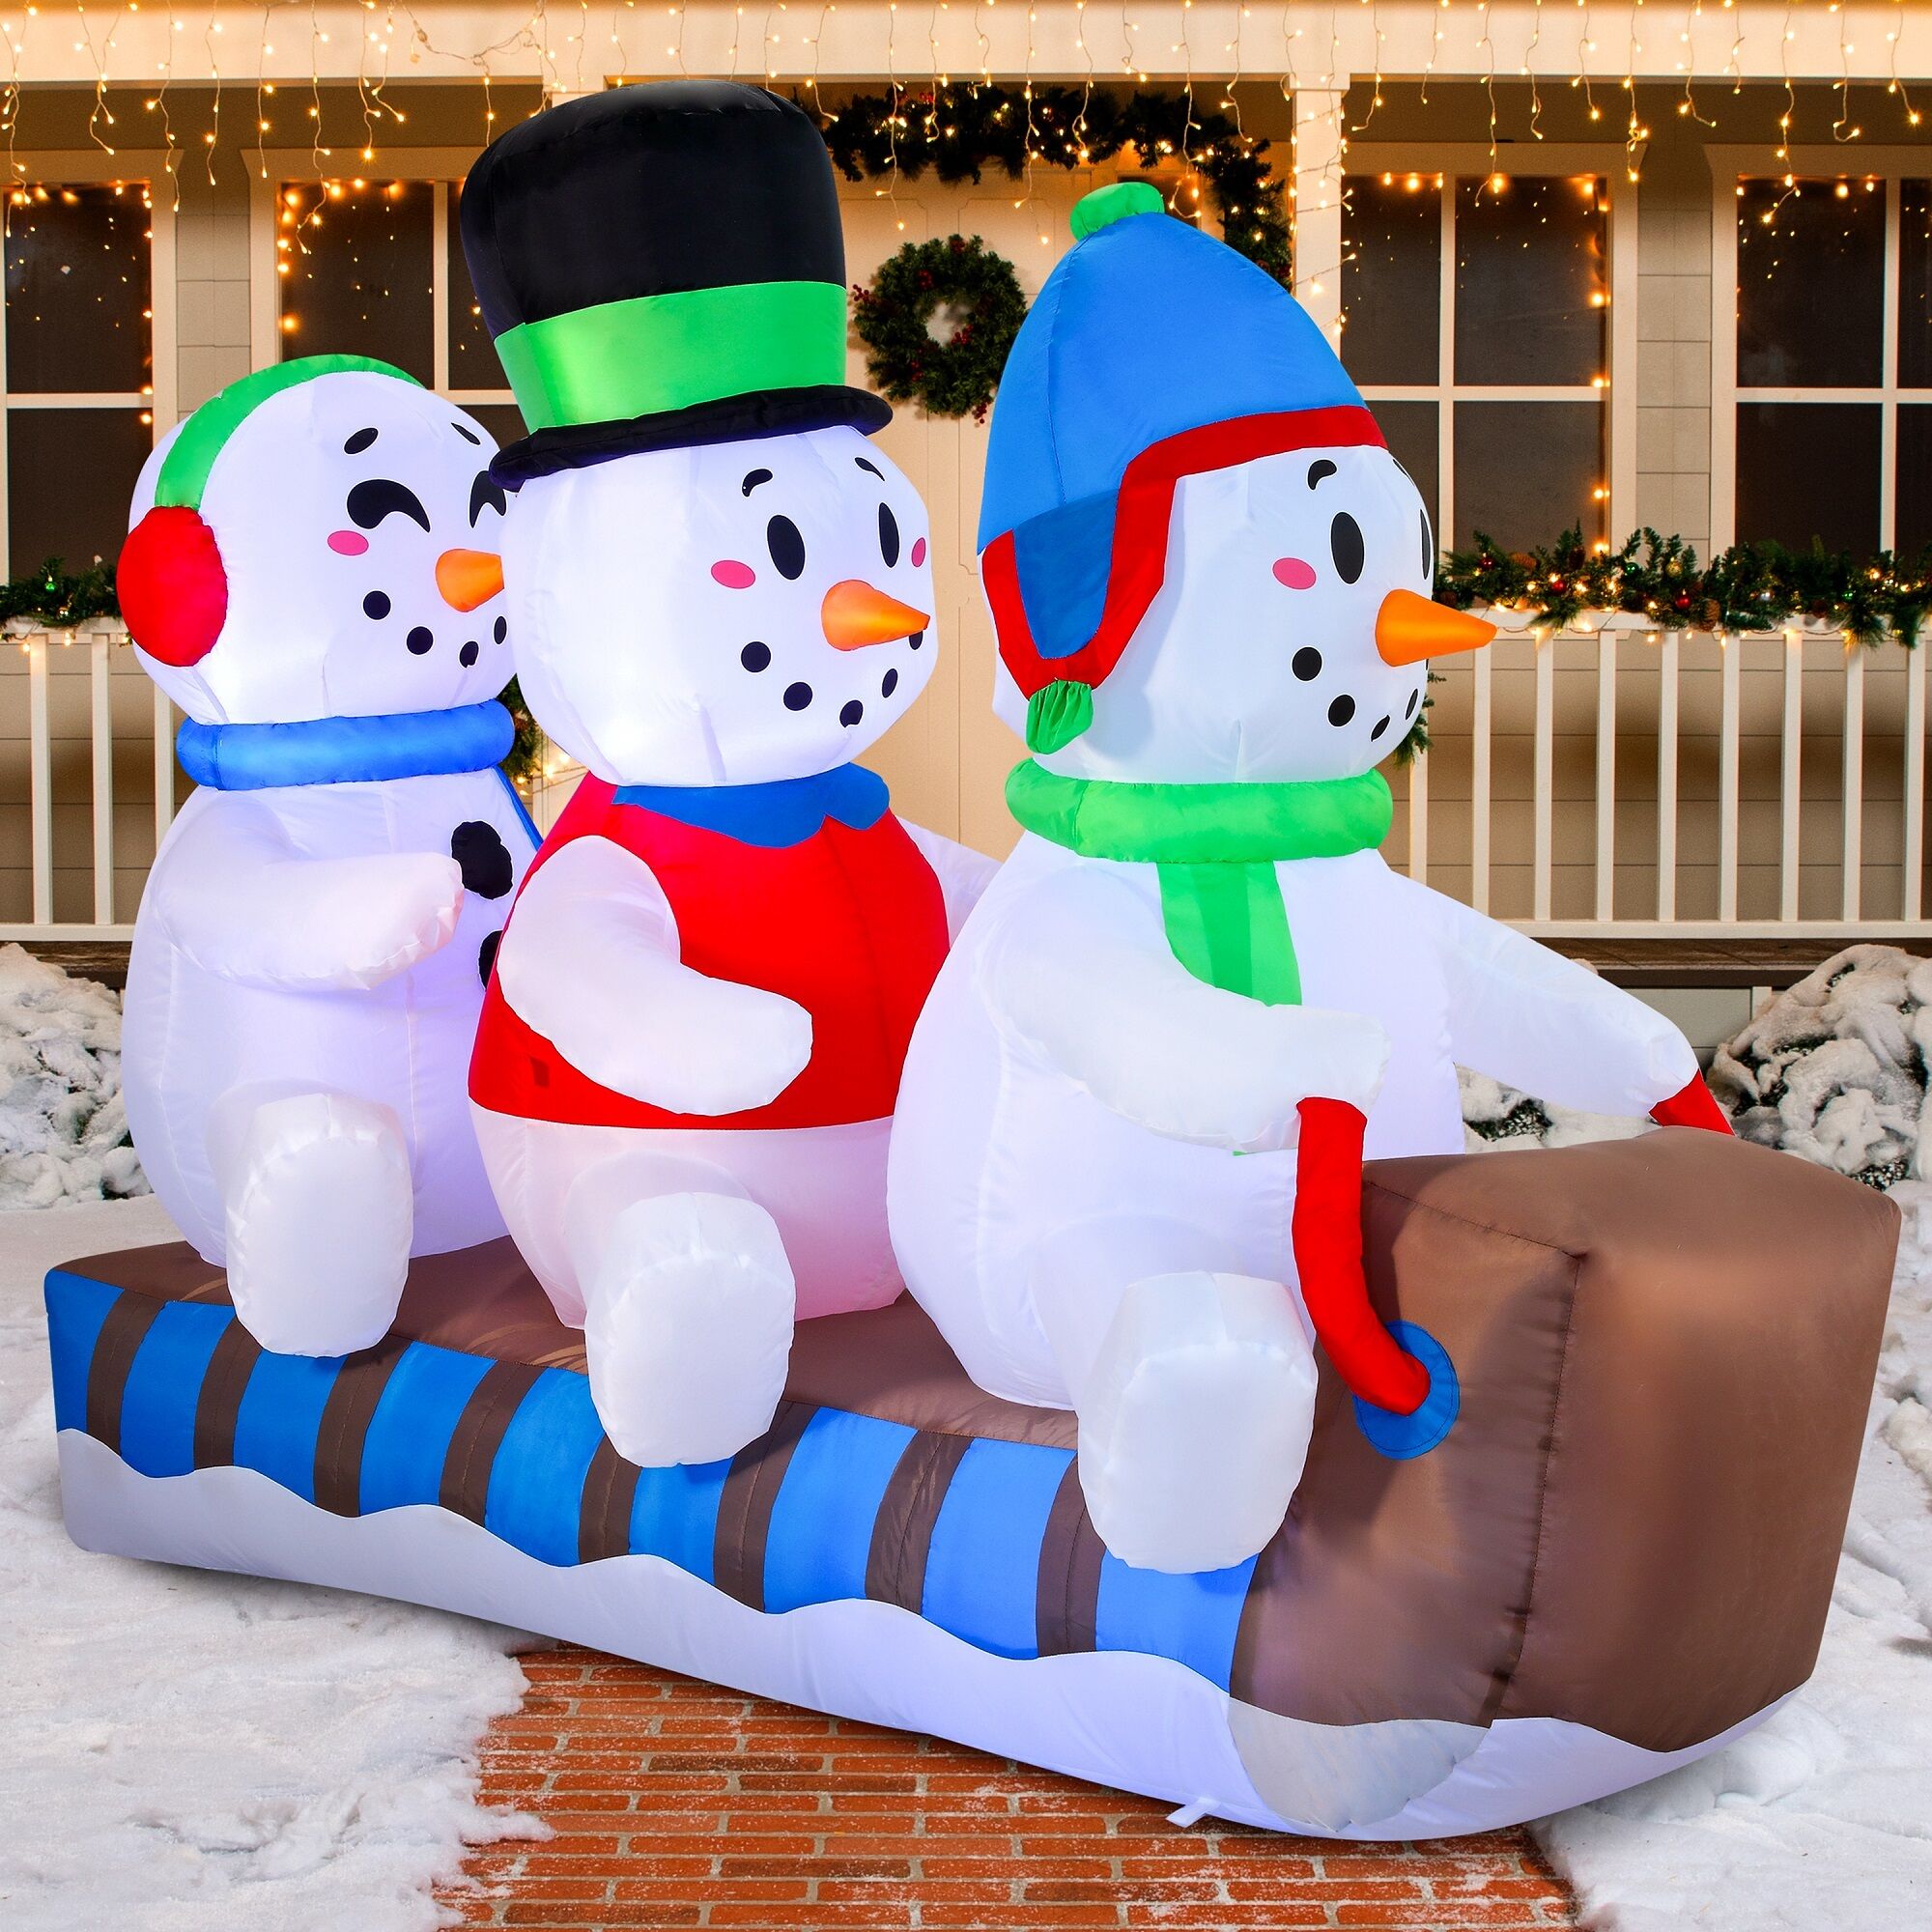 Joiedomi 3-ft Lighted Snowman Christmas Inflatable in the